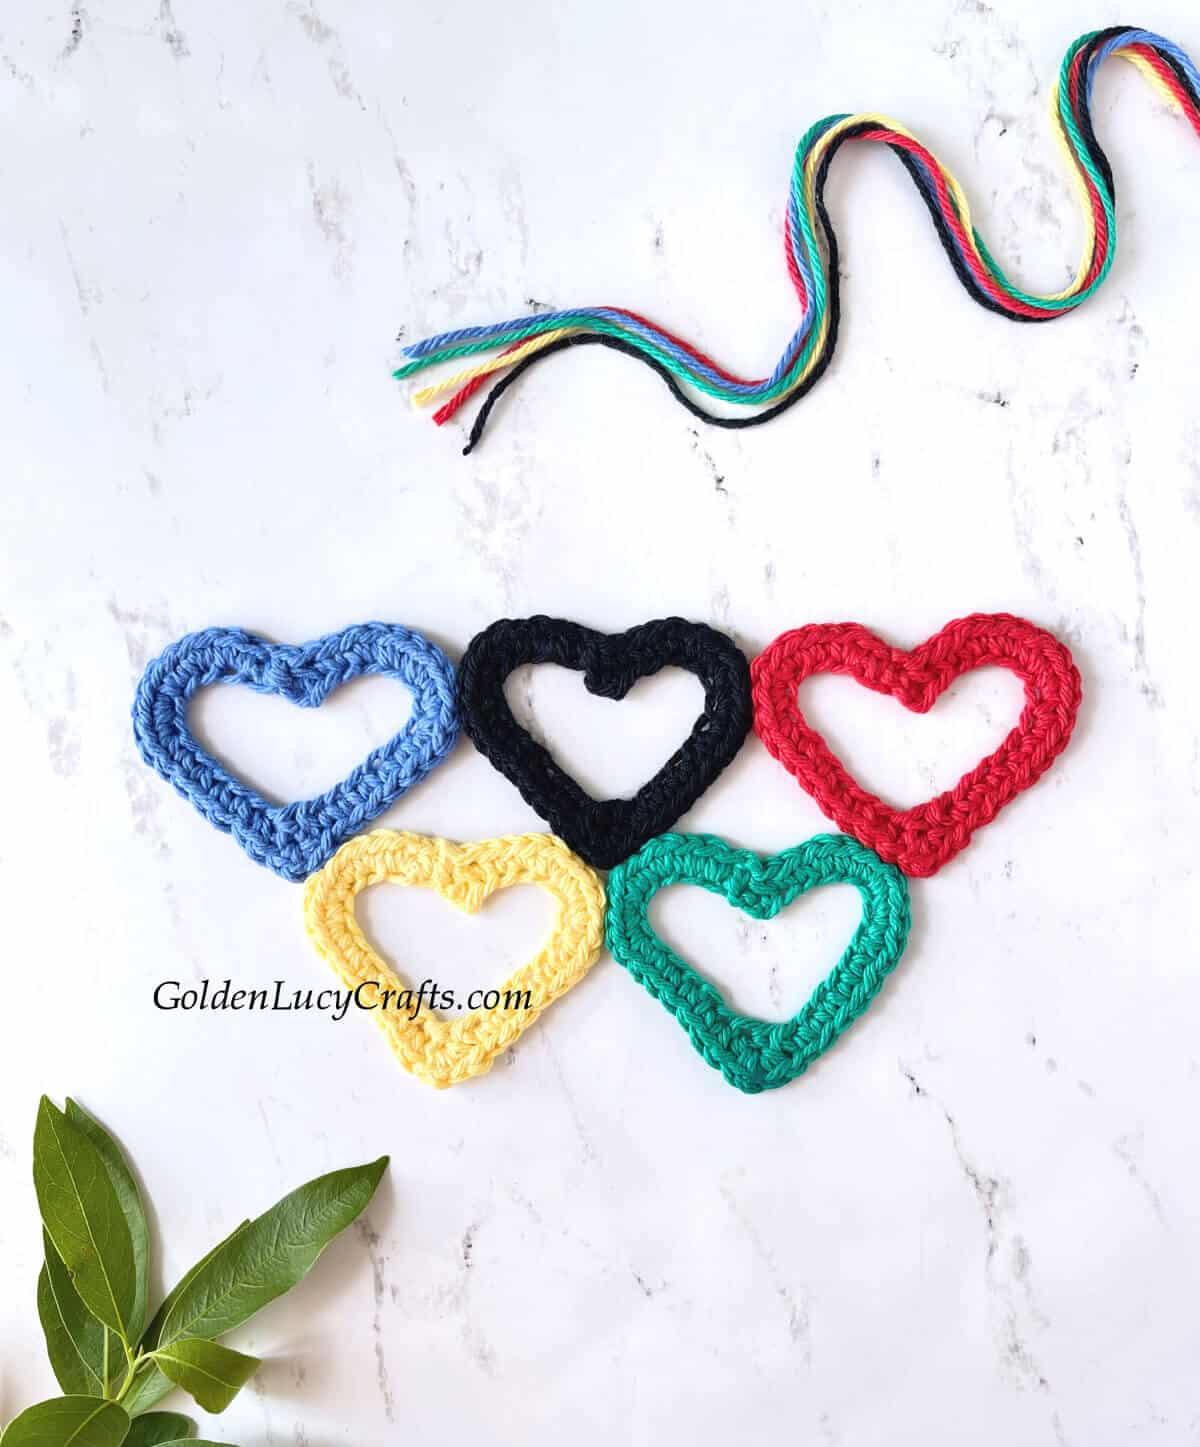 Crocheted heart-shaped Olympic rings applique.